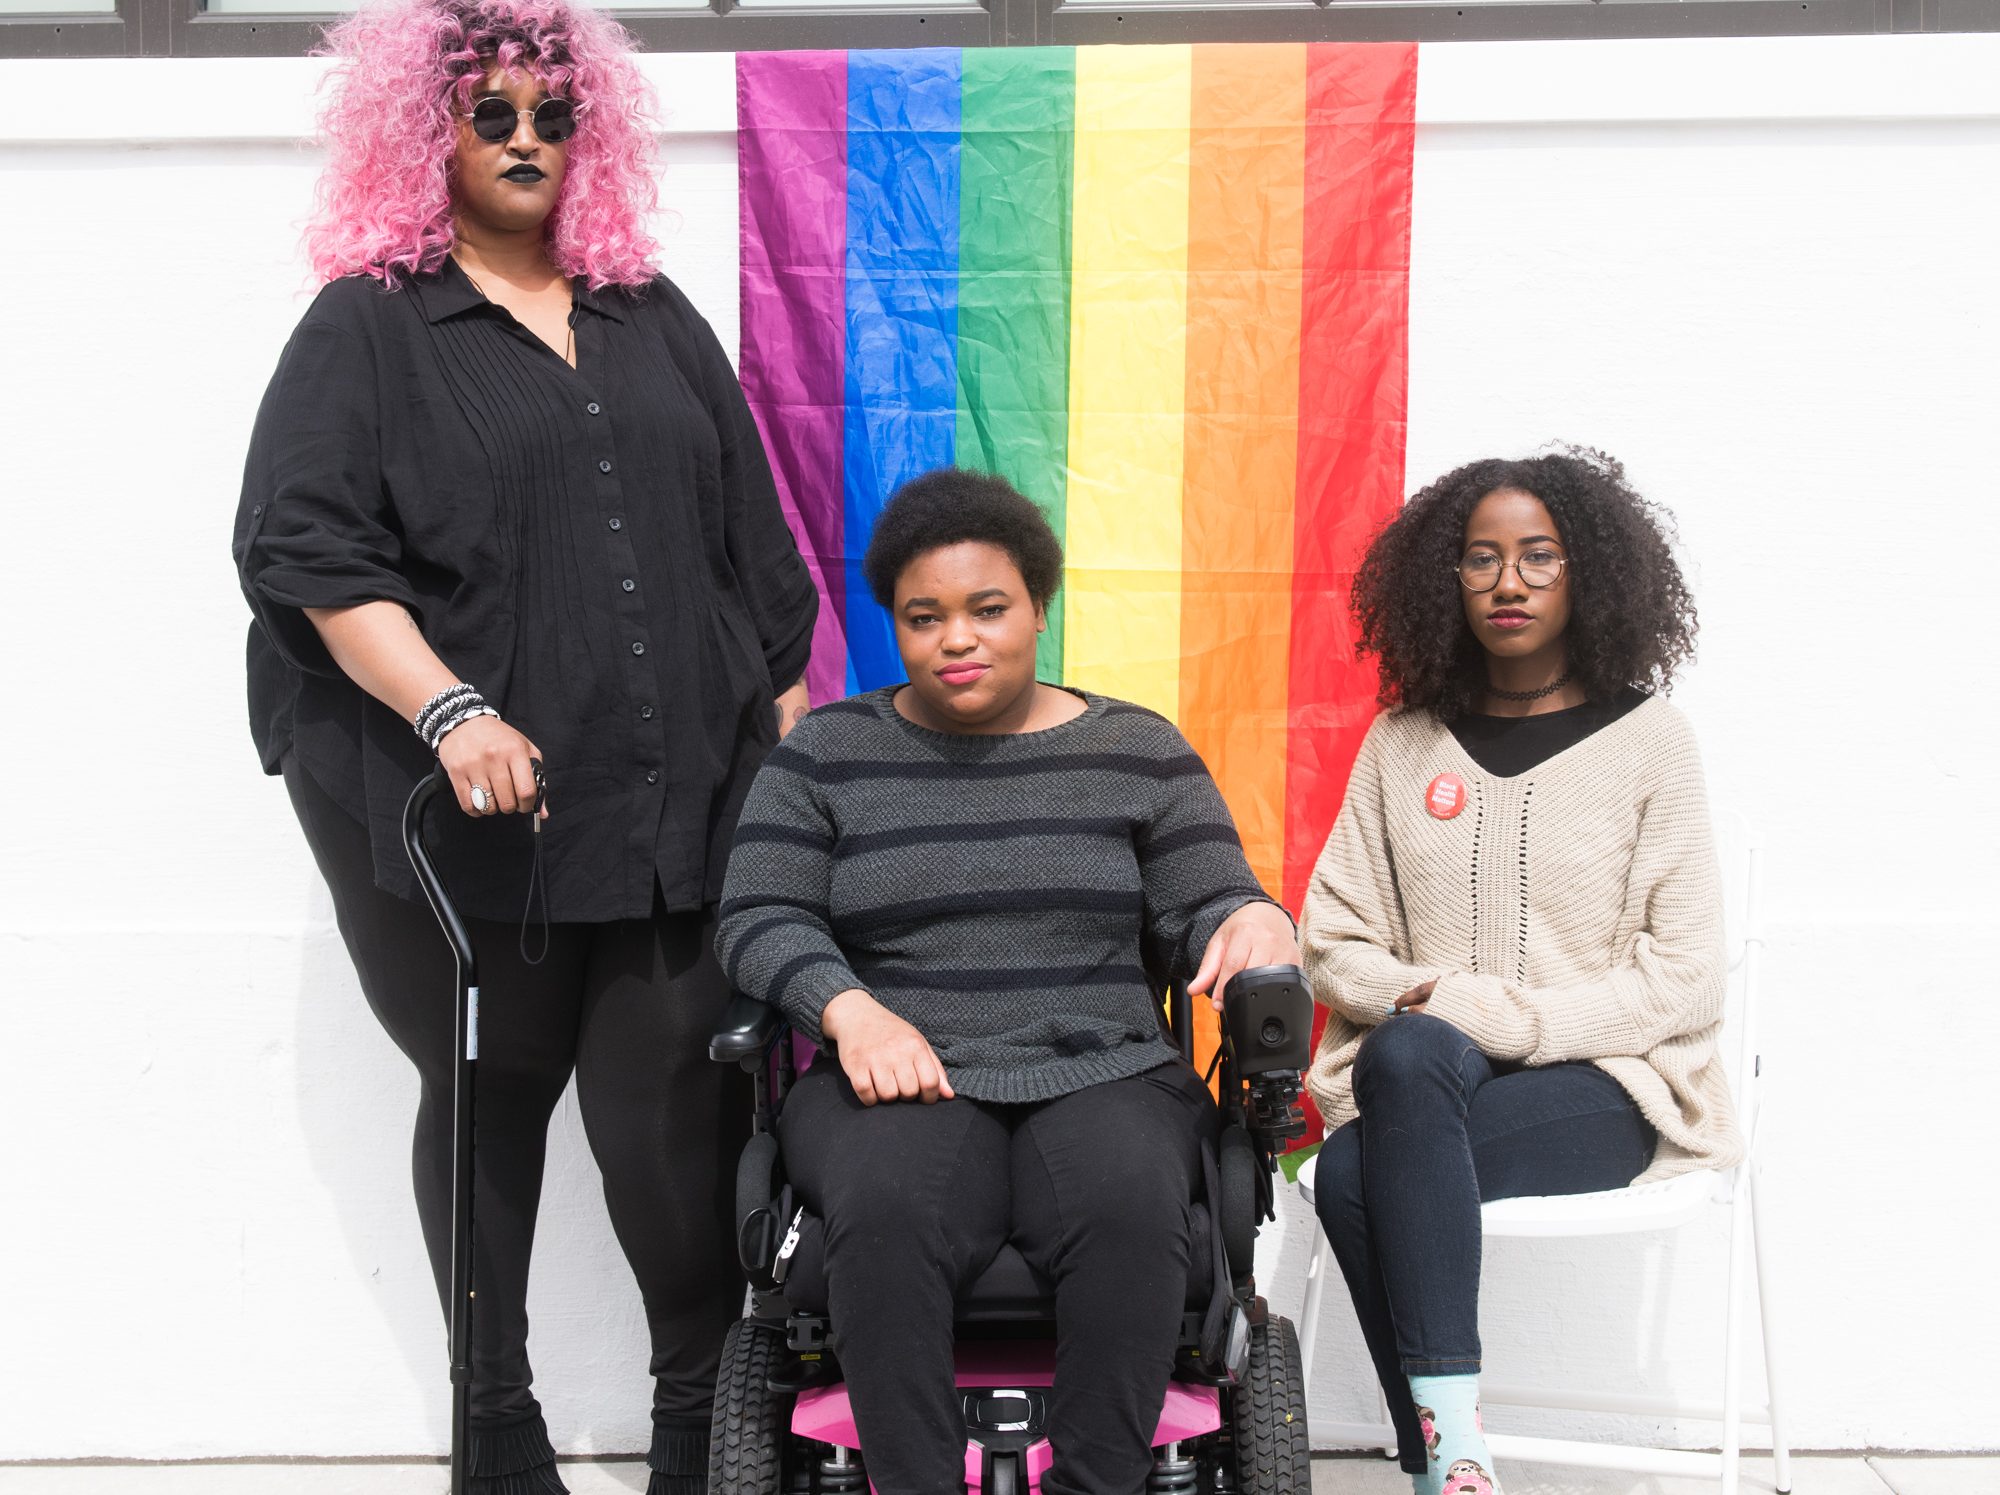 The Margins: Three Black and disabled folx (a non-binary person holding a cane, a woman sitting in a power wheelchair, and a woman sitting in a chair) looking seriously at the camera while a rainbow pride flag drapes on the wall behind them. Credit: Disabled and Here